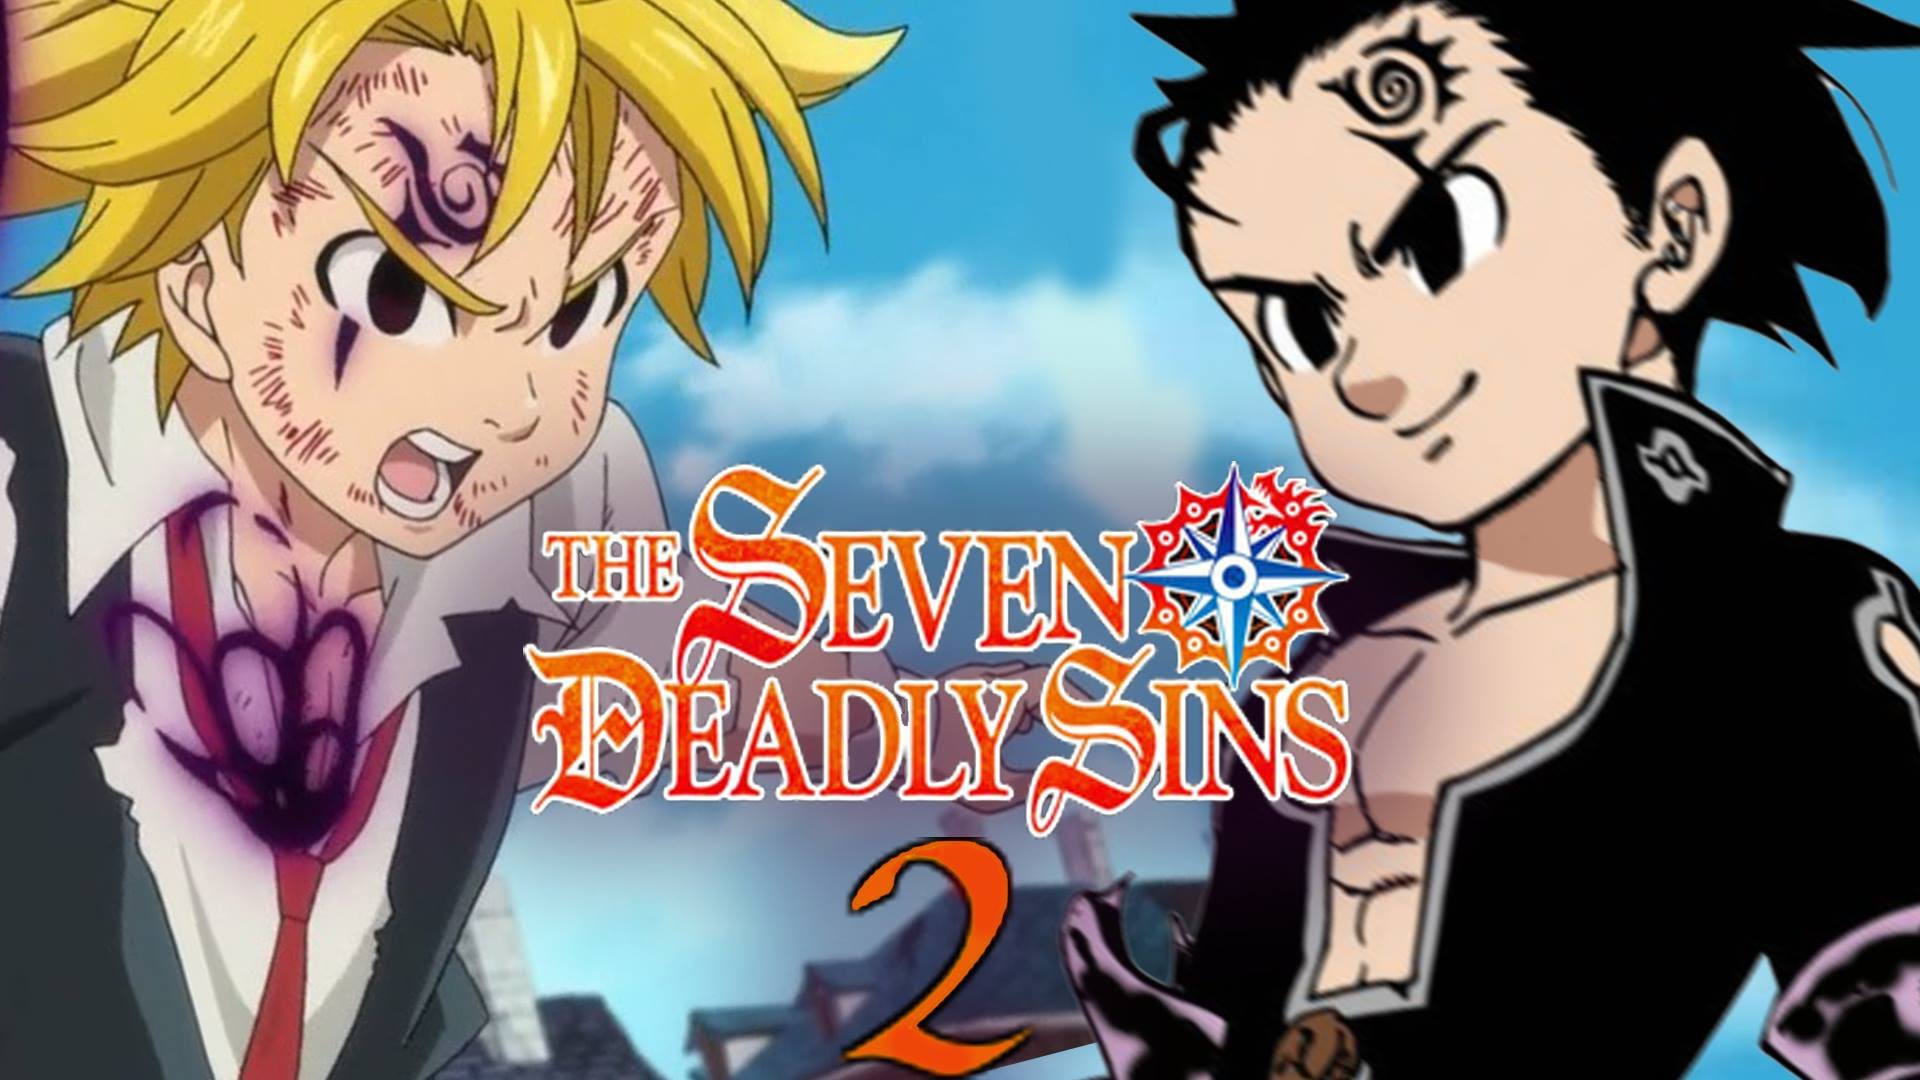 The Seven Deadly Sins Wallpapers Anime Hq The Seven Deadly